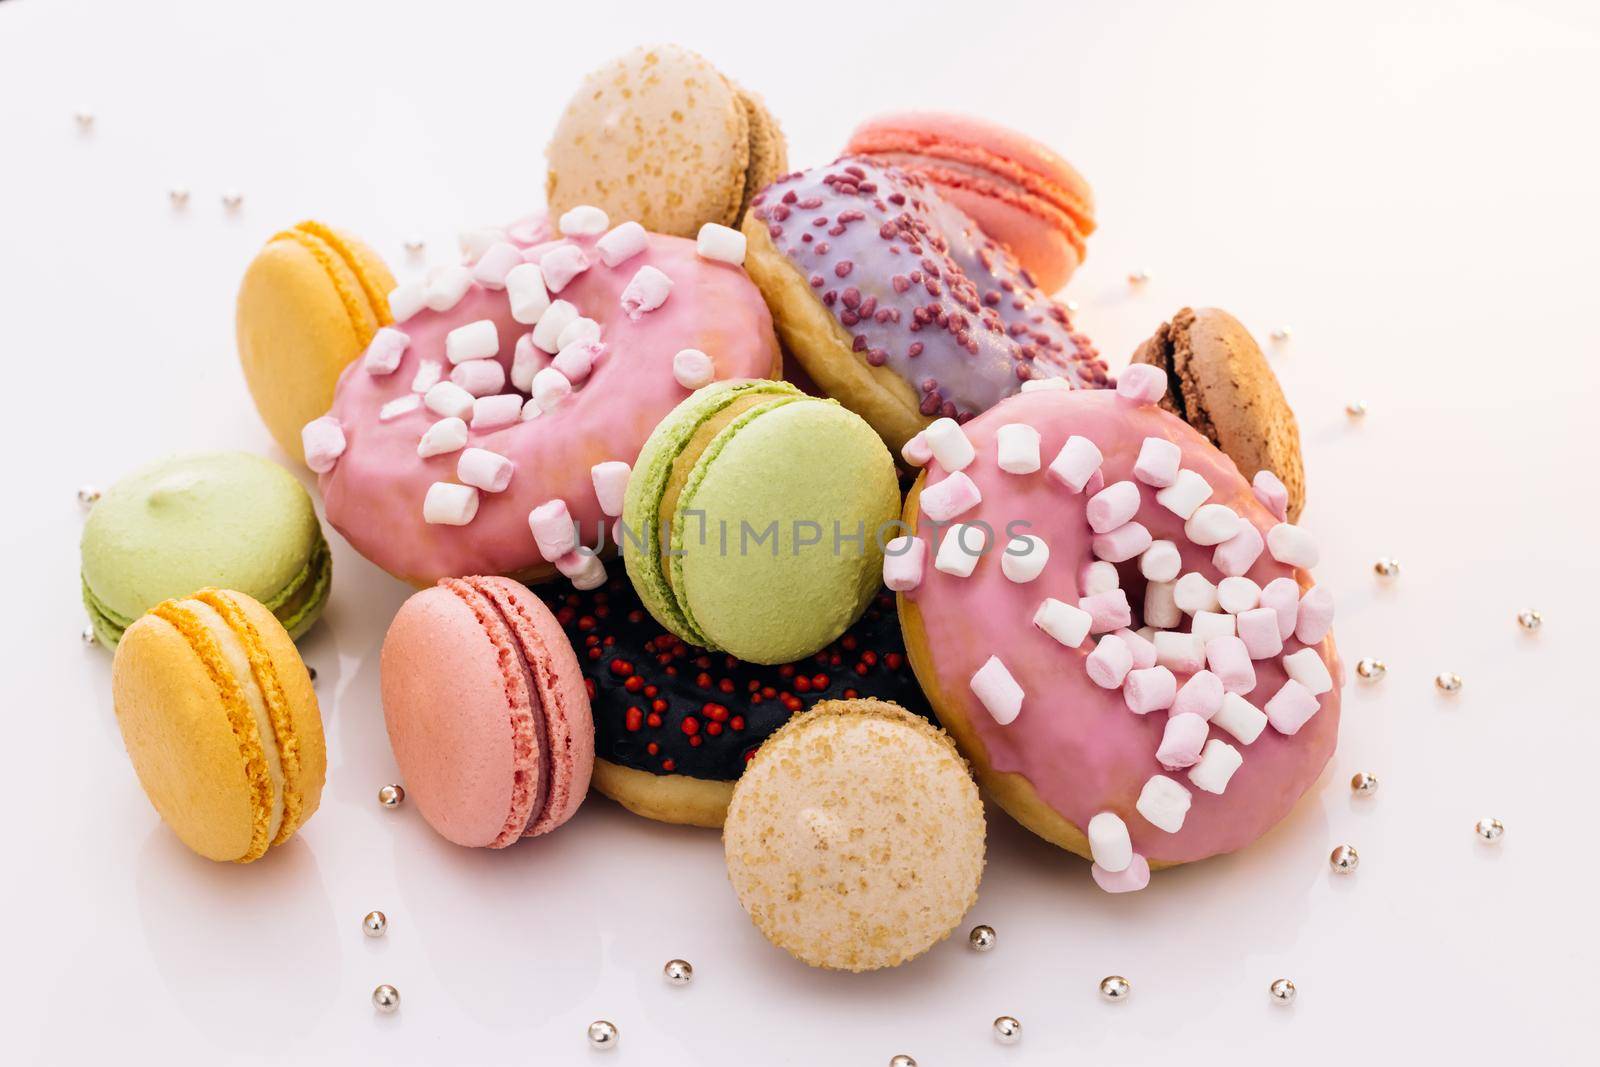 Many multi-colored macarons donuts with different tastes, dessert. French macaroons. Macaroons and donuts on a white background by uflypro